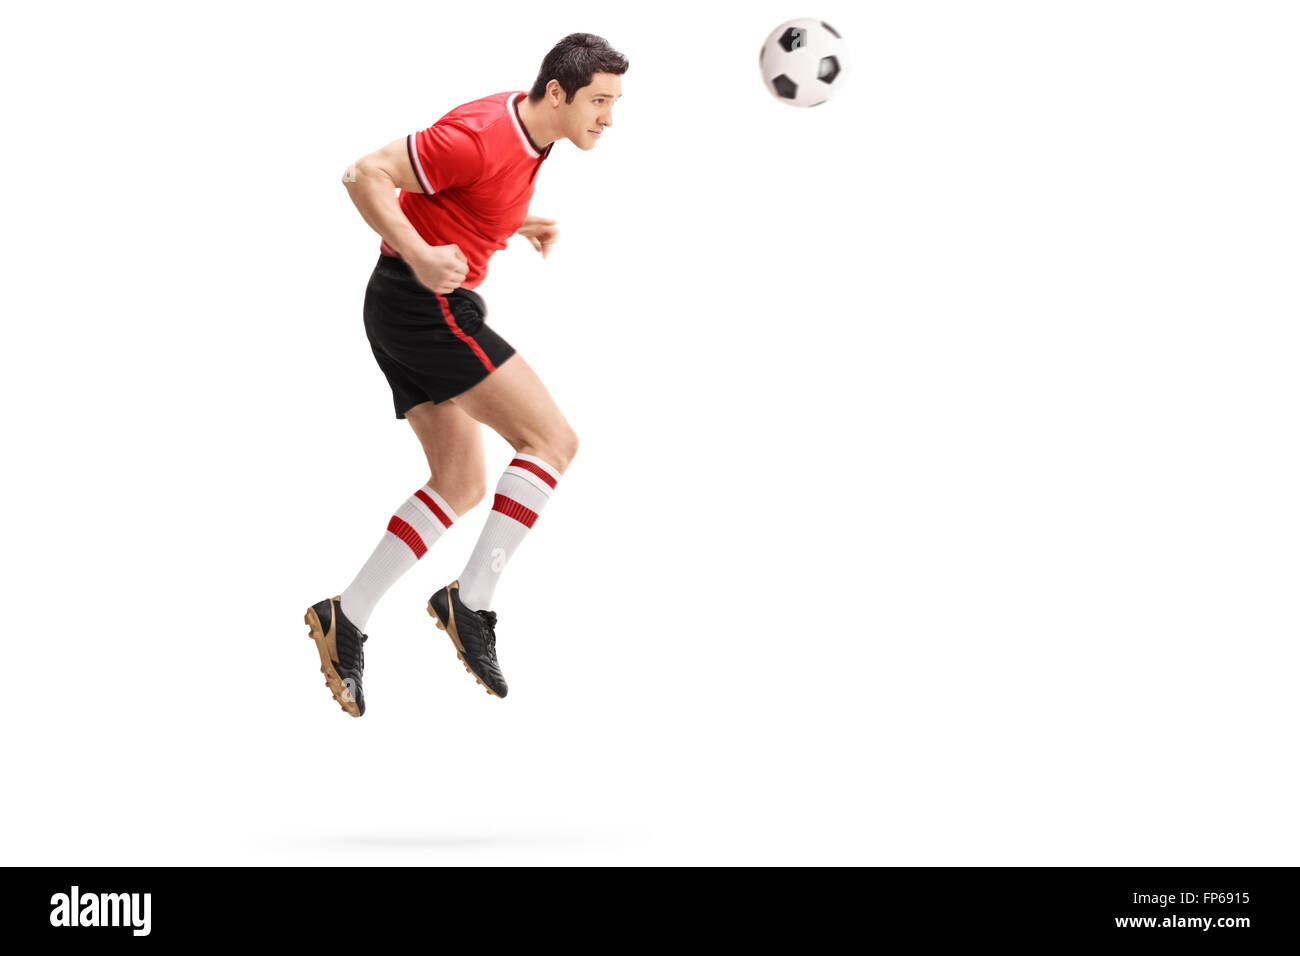 Full length profile shot of a male football player heading a ball shot in mid-air isolated on white background Stock Photo